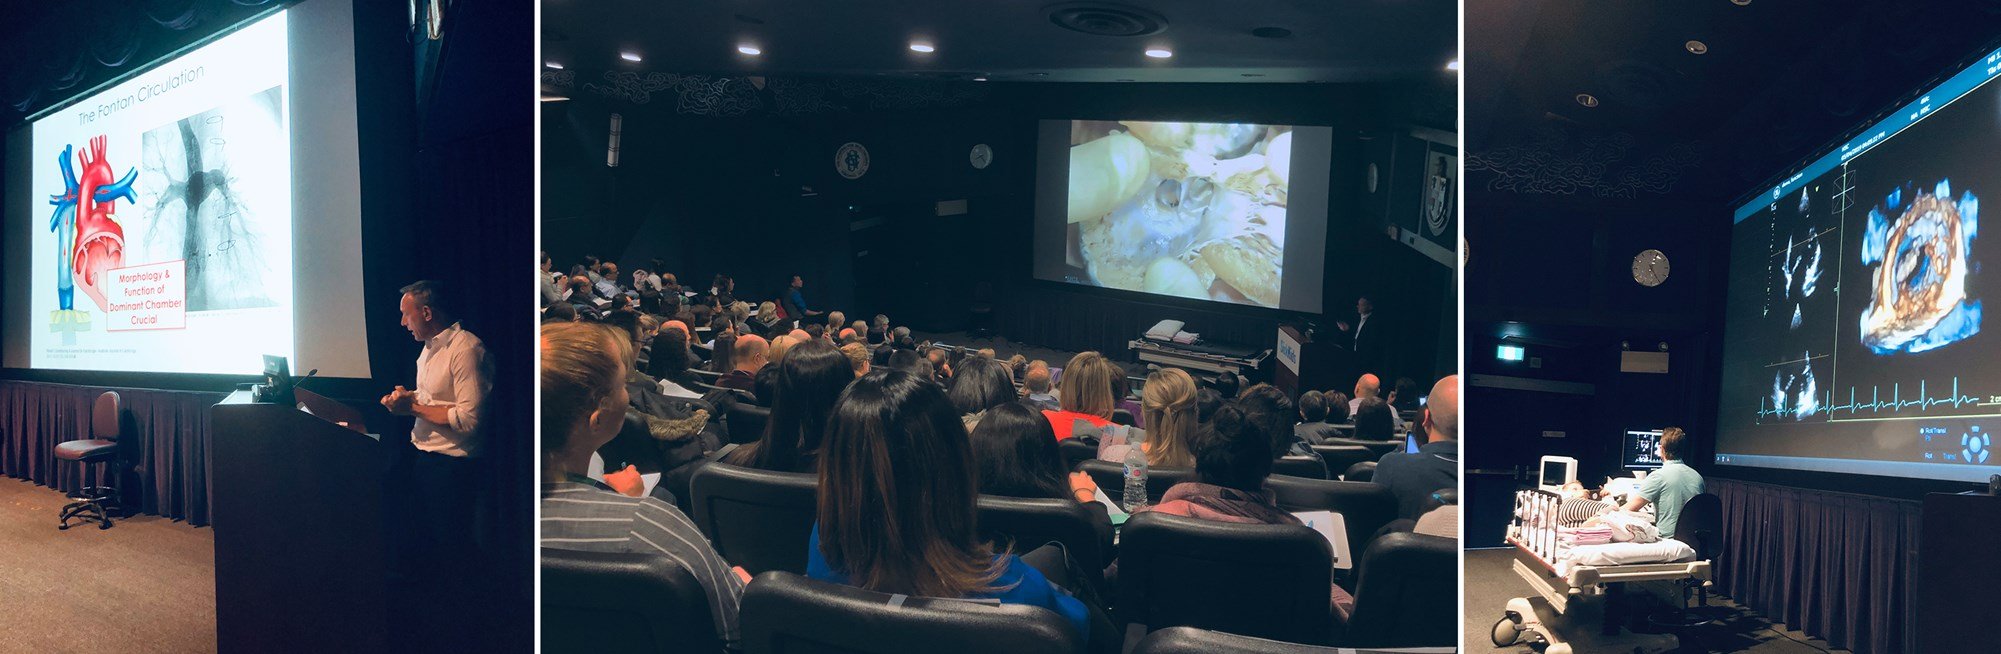 The Echocardiography Course on Congenital Heart Disease held at SickKids features echo-morphology correlation lectures, live scanning demonstrations and an international faculty of experts.